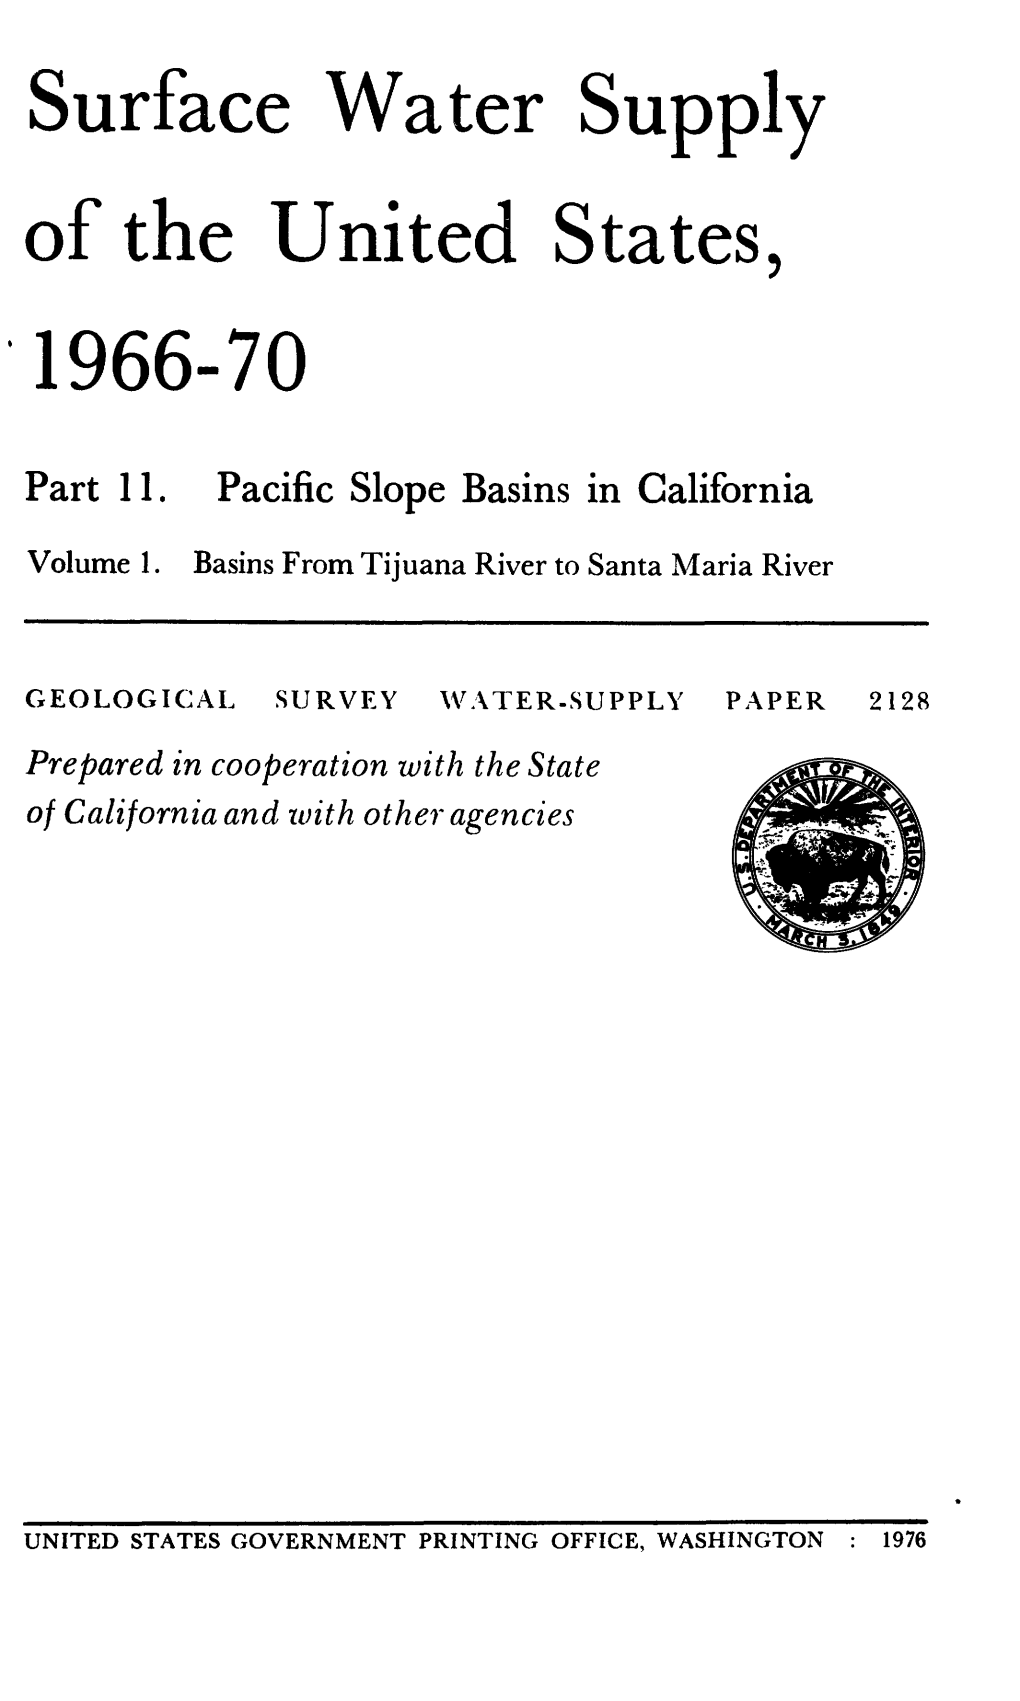 Surface Water Supply of the United States, 1966-70